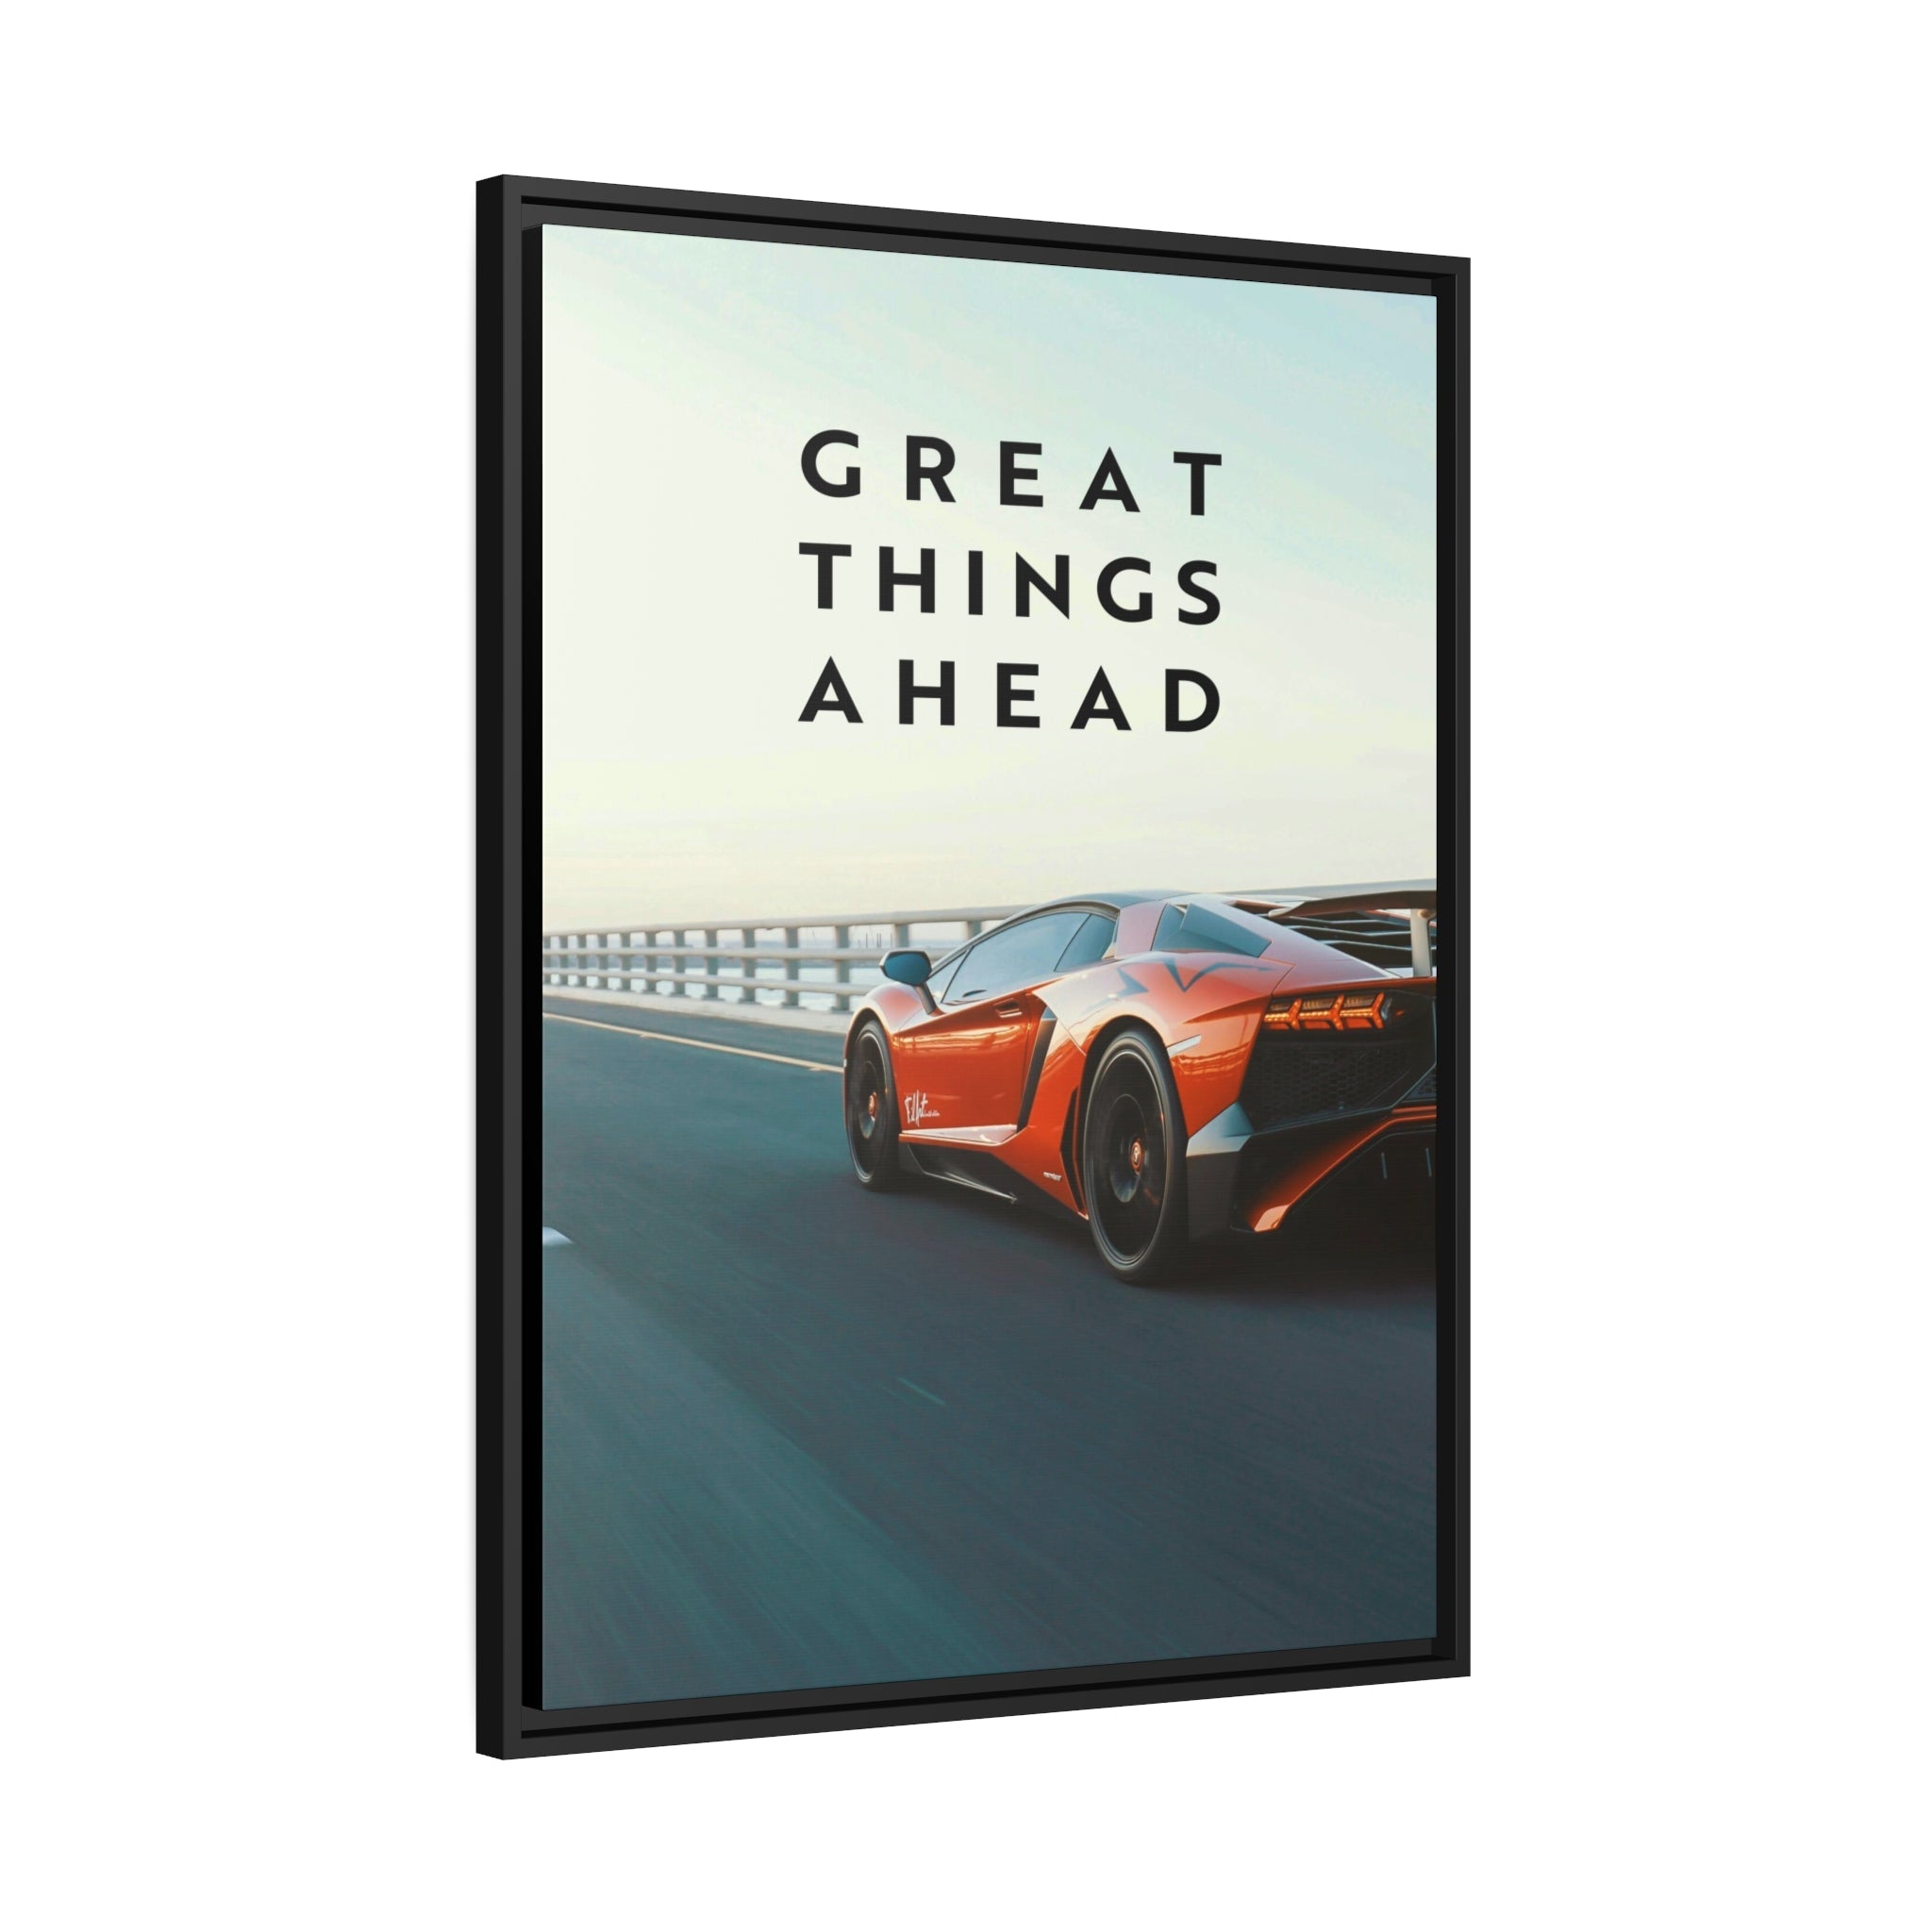 Great Things Ahead - Sports Car - Wall Art additional image 5